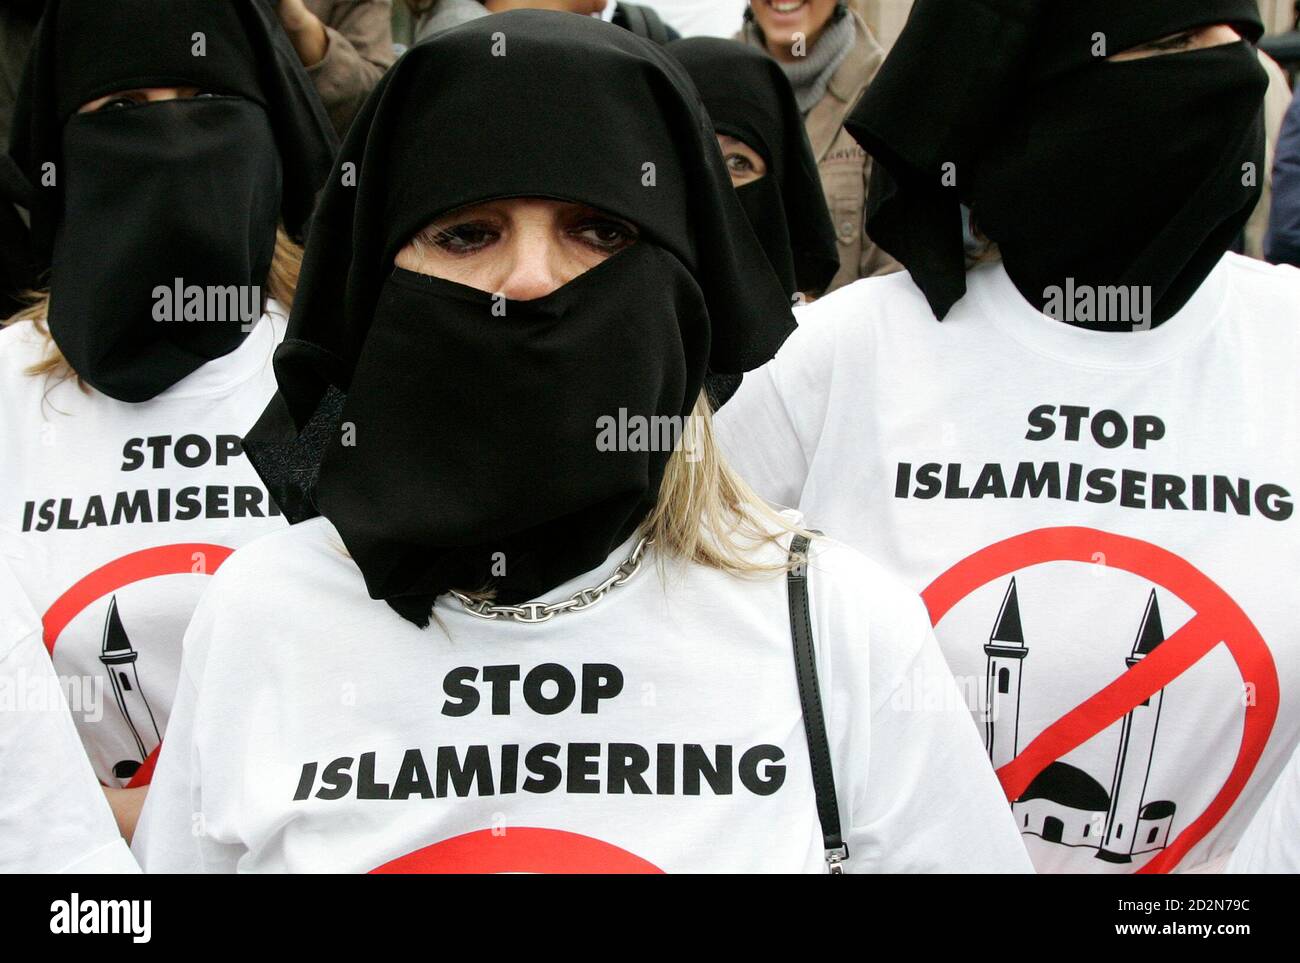 Supporters of the Belgium's far-right party Vlaams Belang wear mock-Muslim  scarves and tee-shirts reading "Stop Islamisation" during a banned  demonstration organised by a group called "Stop the Islamisation of Europe"  in Brussels